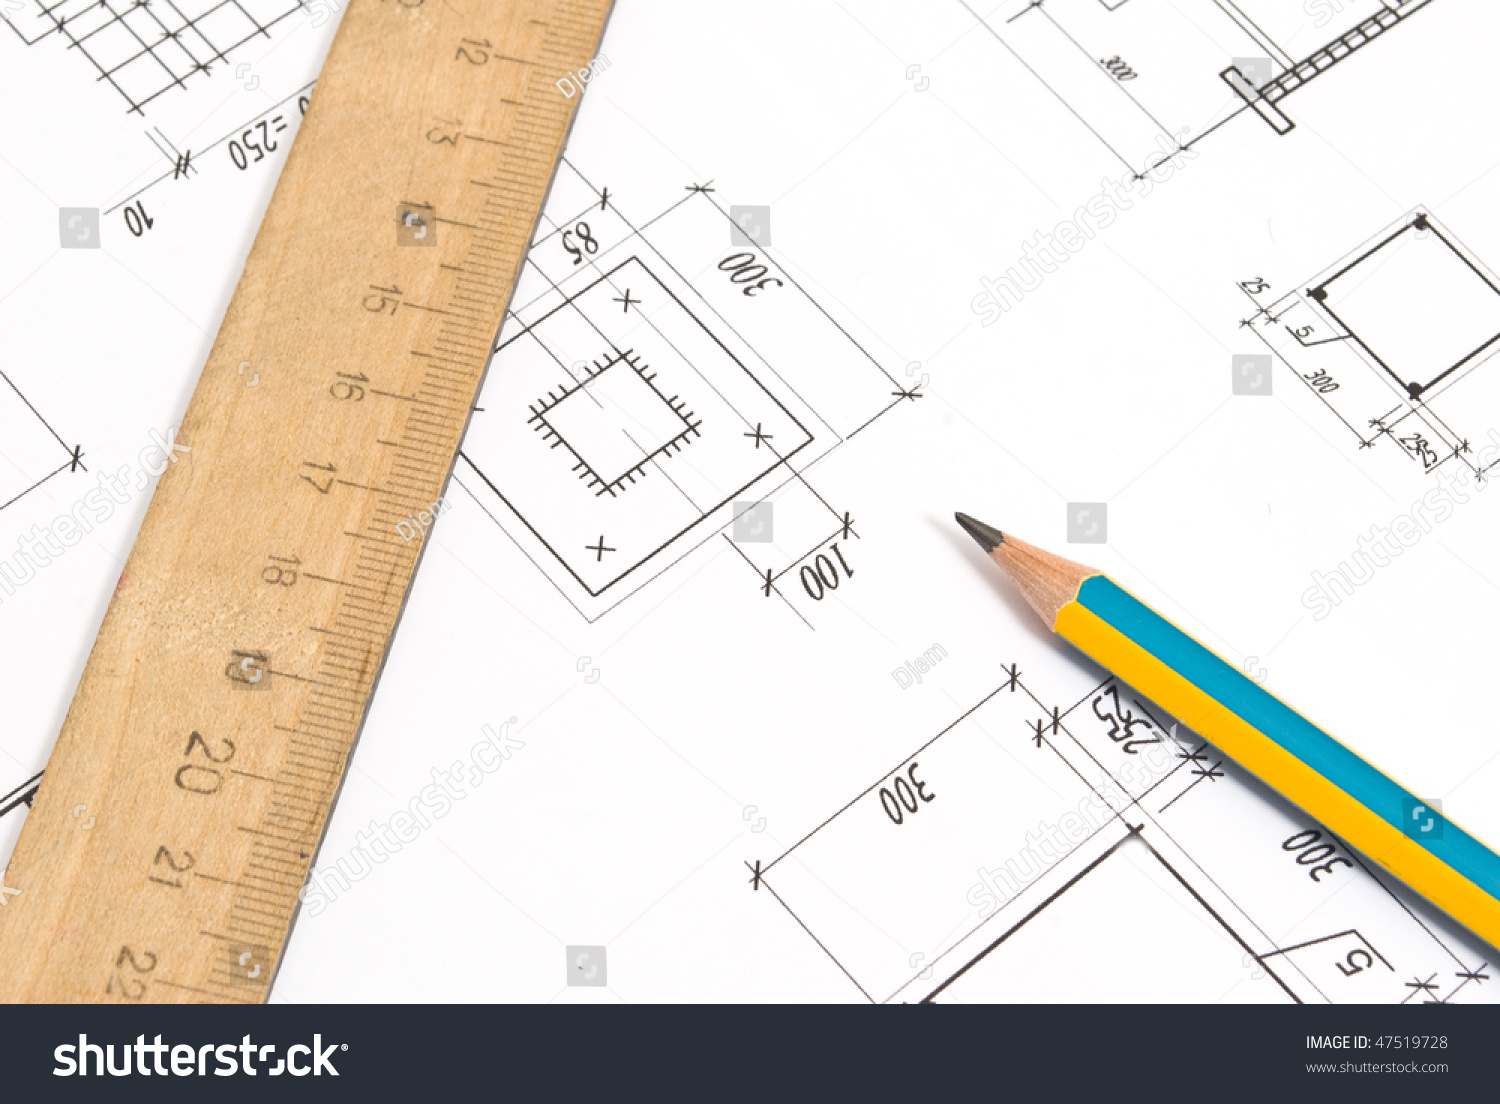 Drawing Various Tools Stock Photo (Edit Now) 47519728